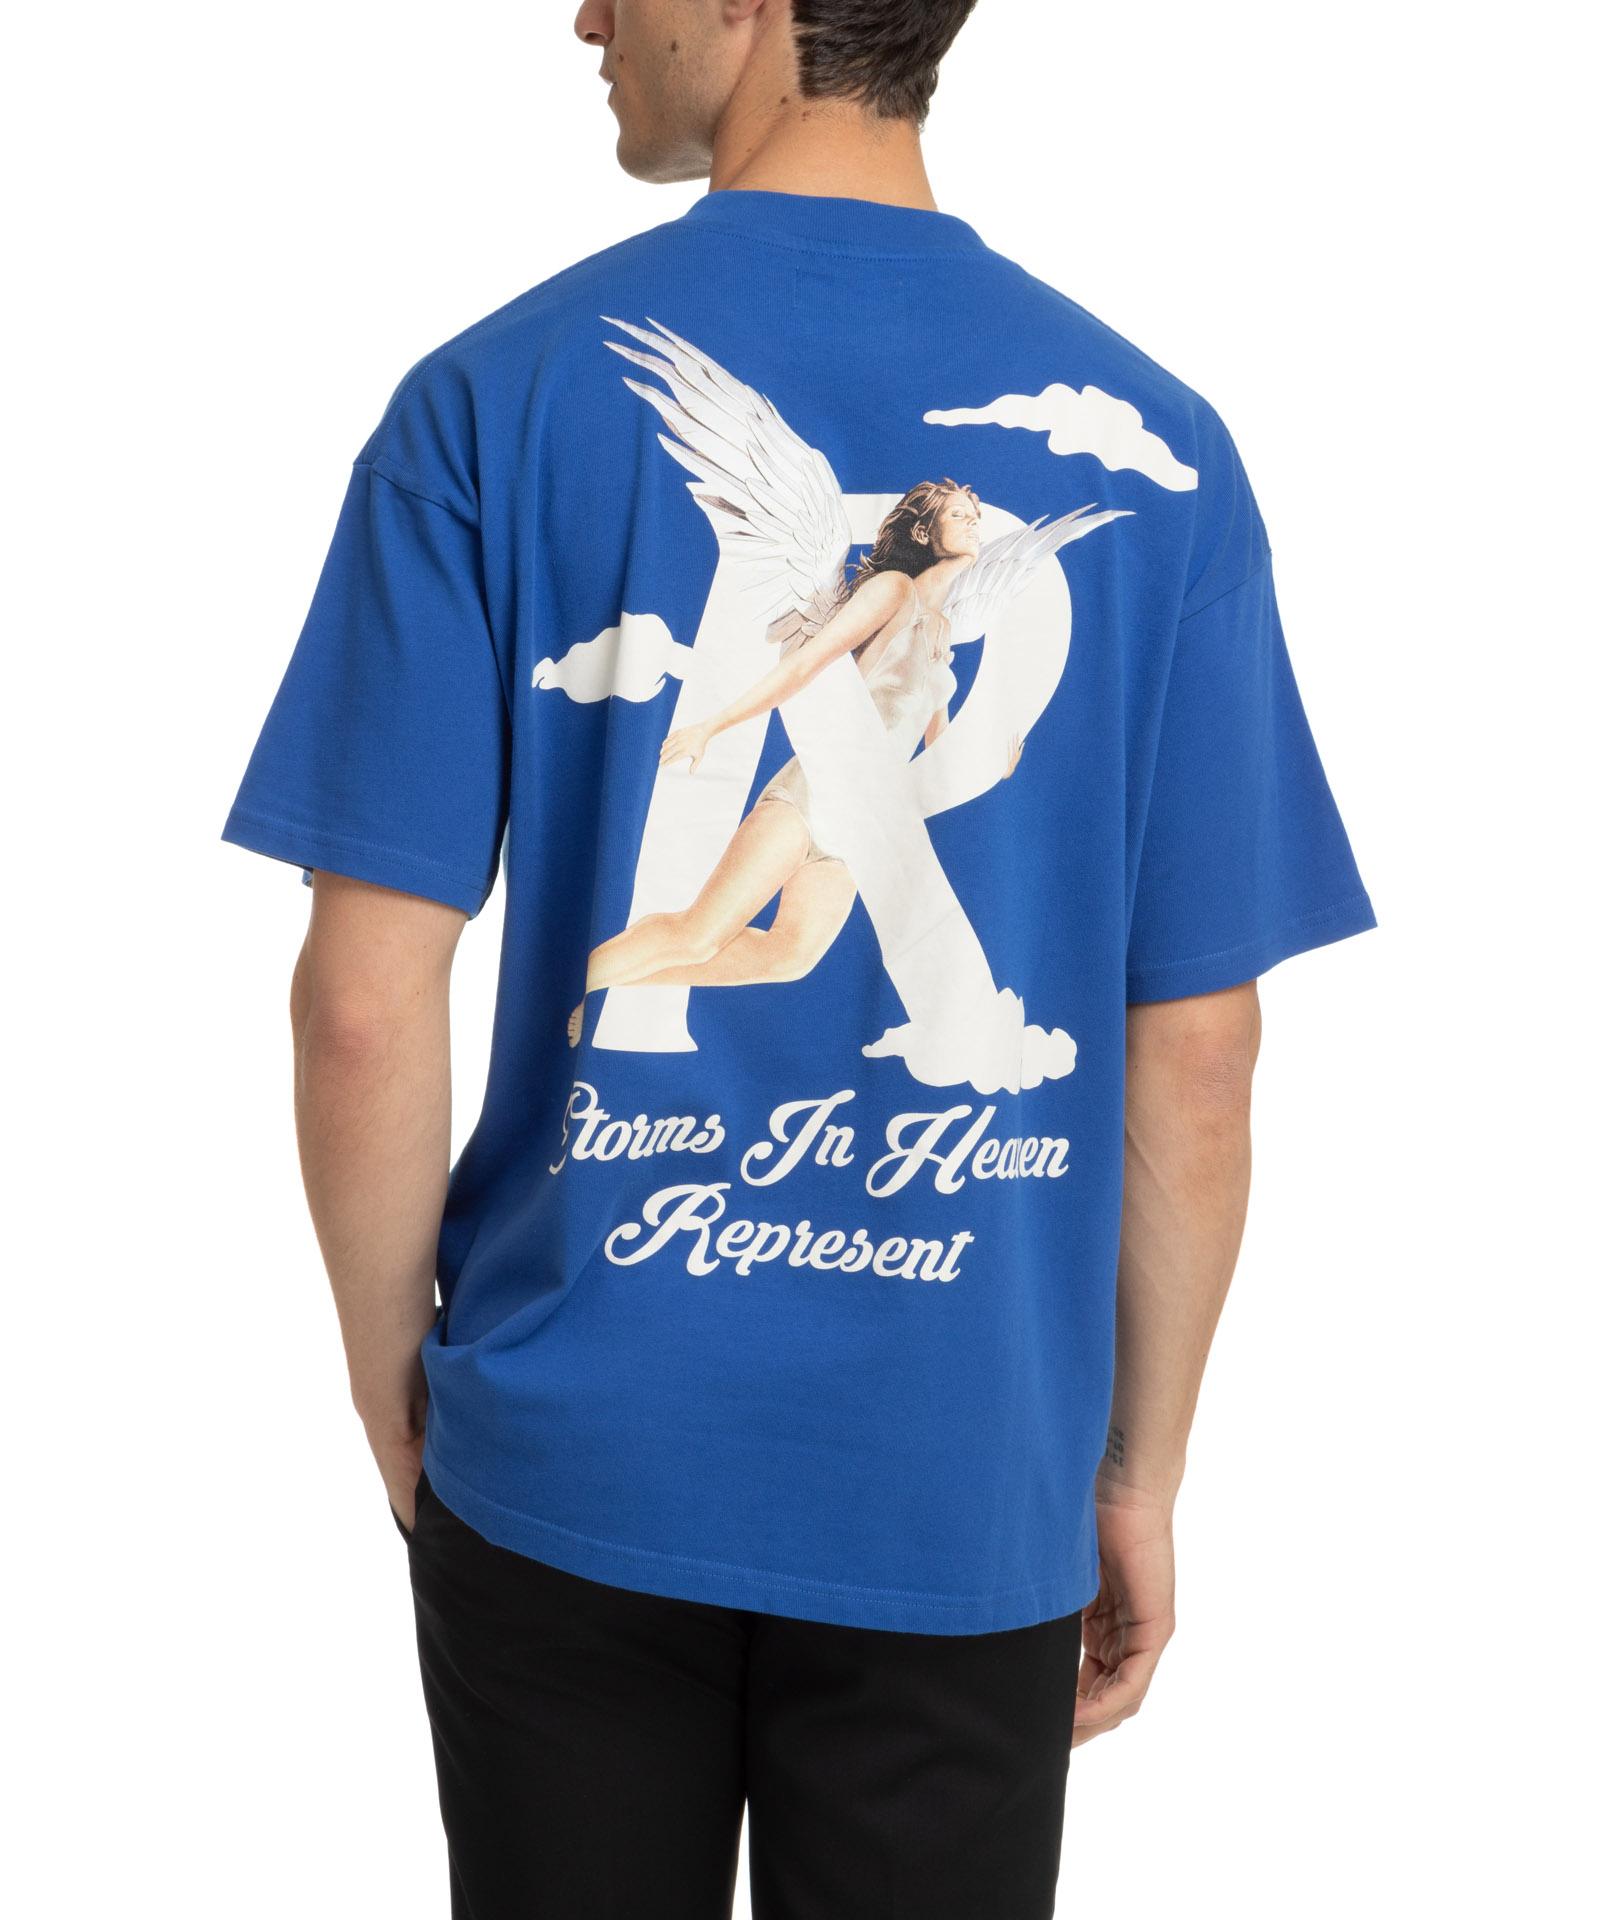 Represent Storms In Heaven Cotton T-shirt in Blue for Men